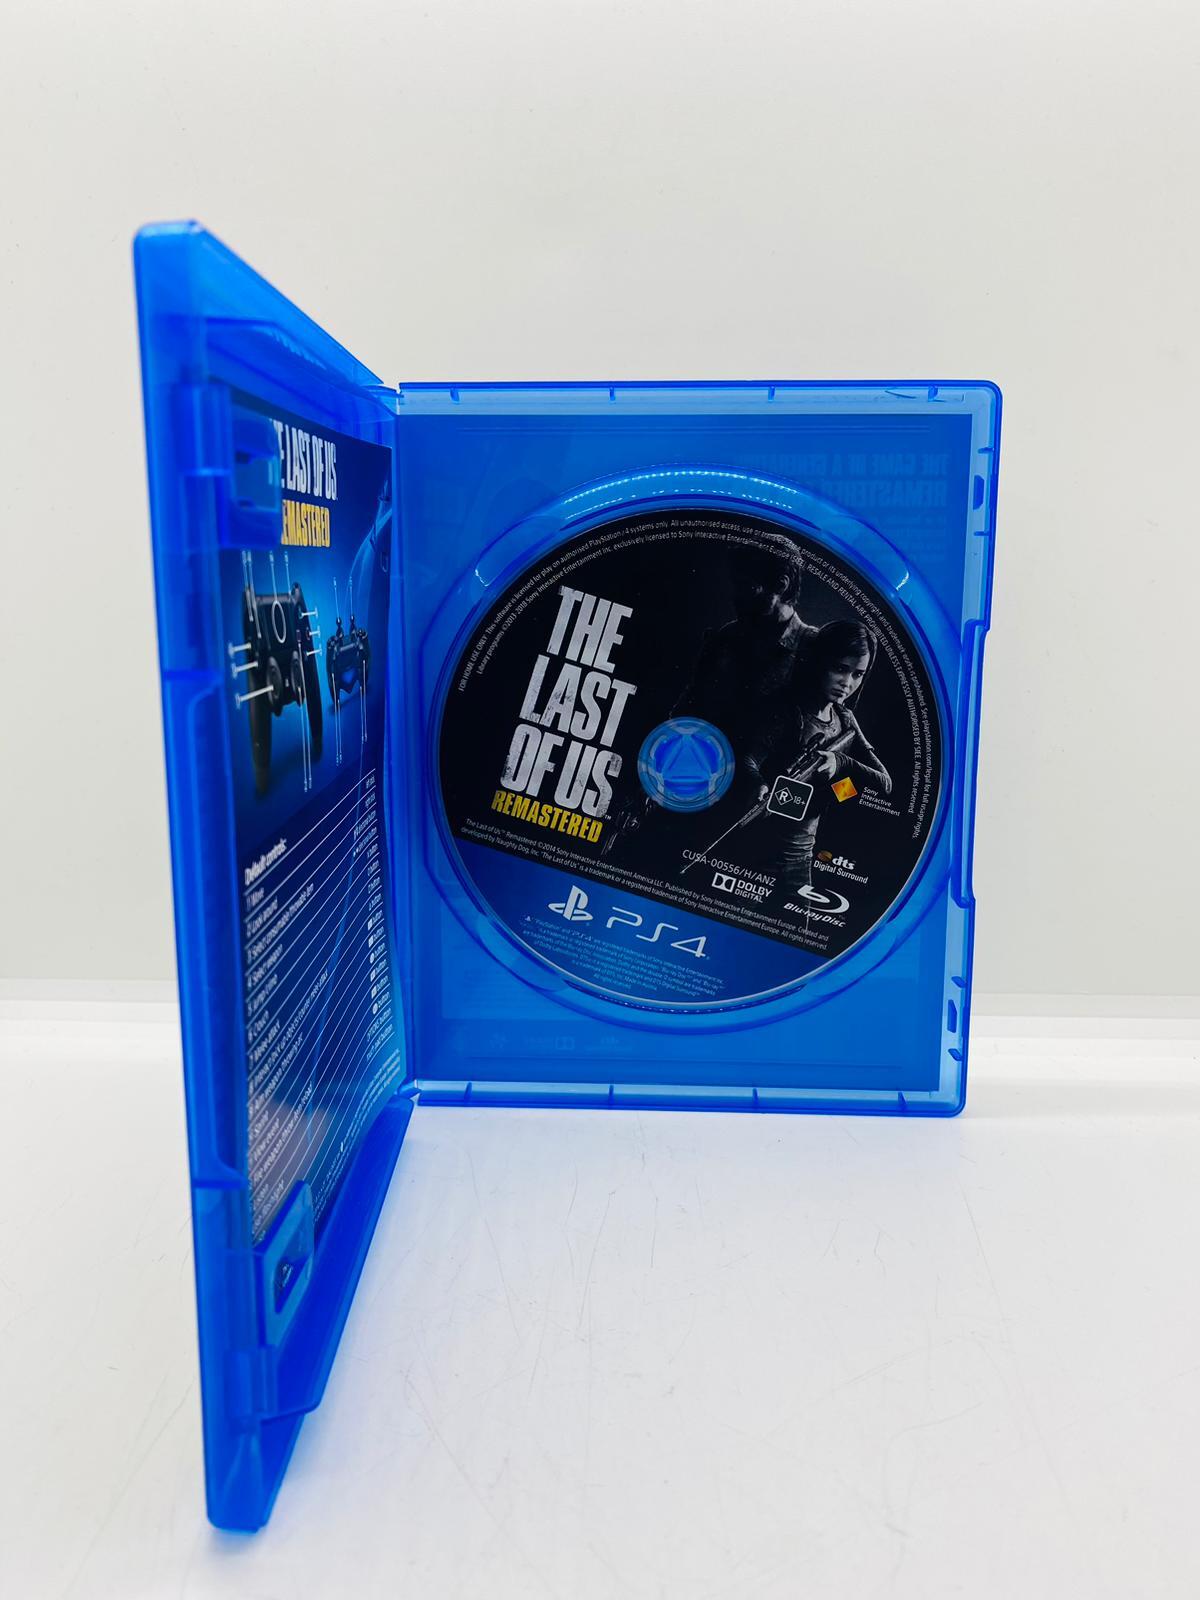 Pre-Owned, Sony The Last Of Us: Remastered (Ps4)